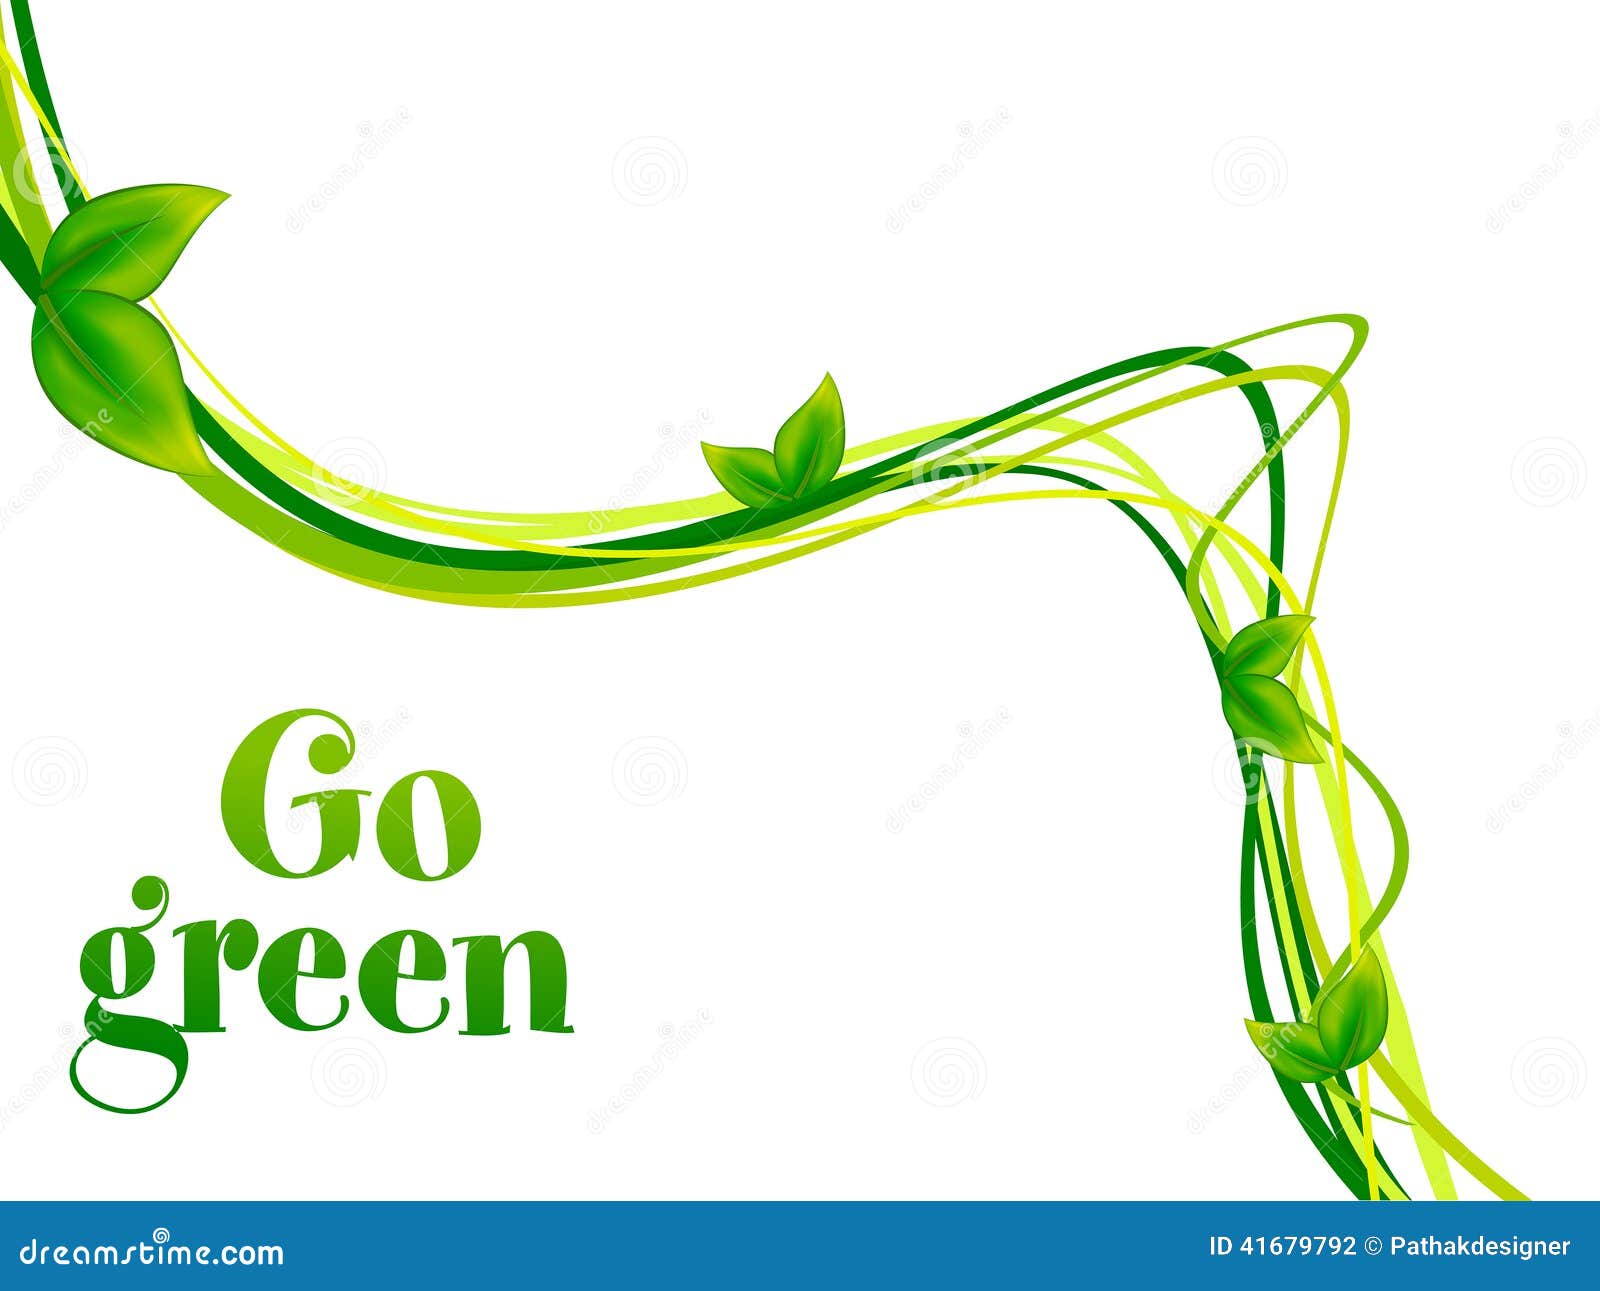 go green clip art pictures - photo #38